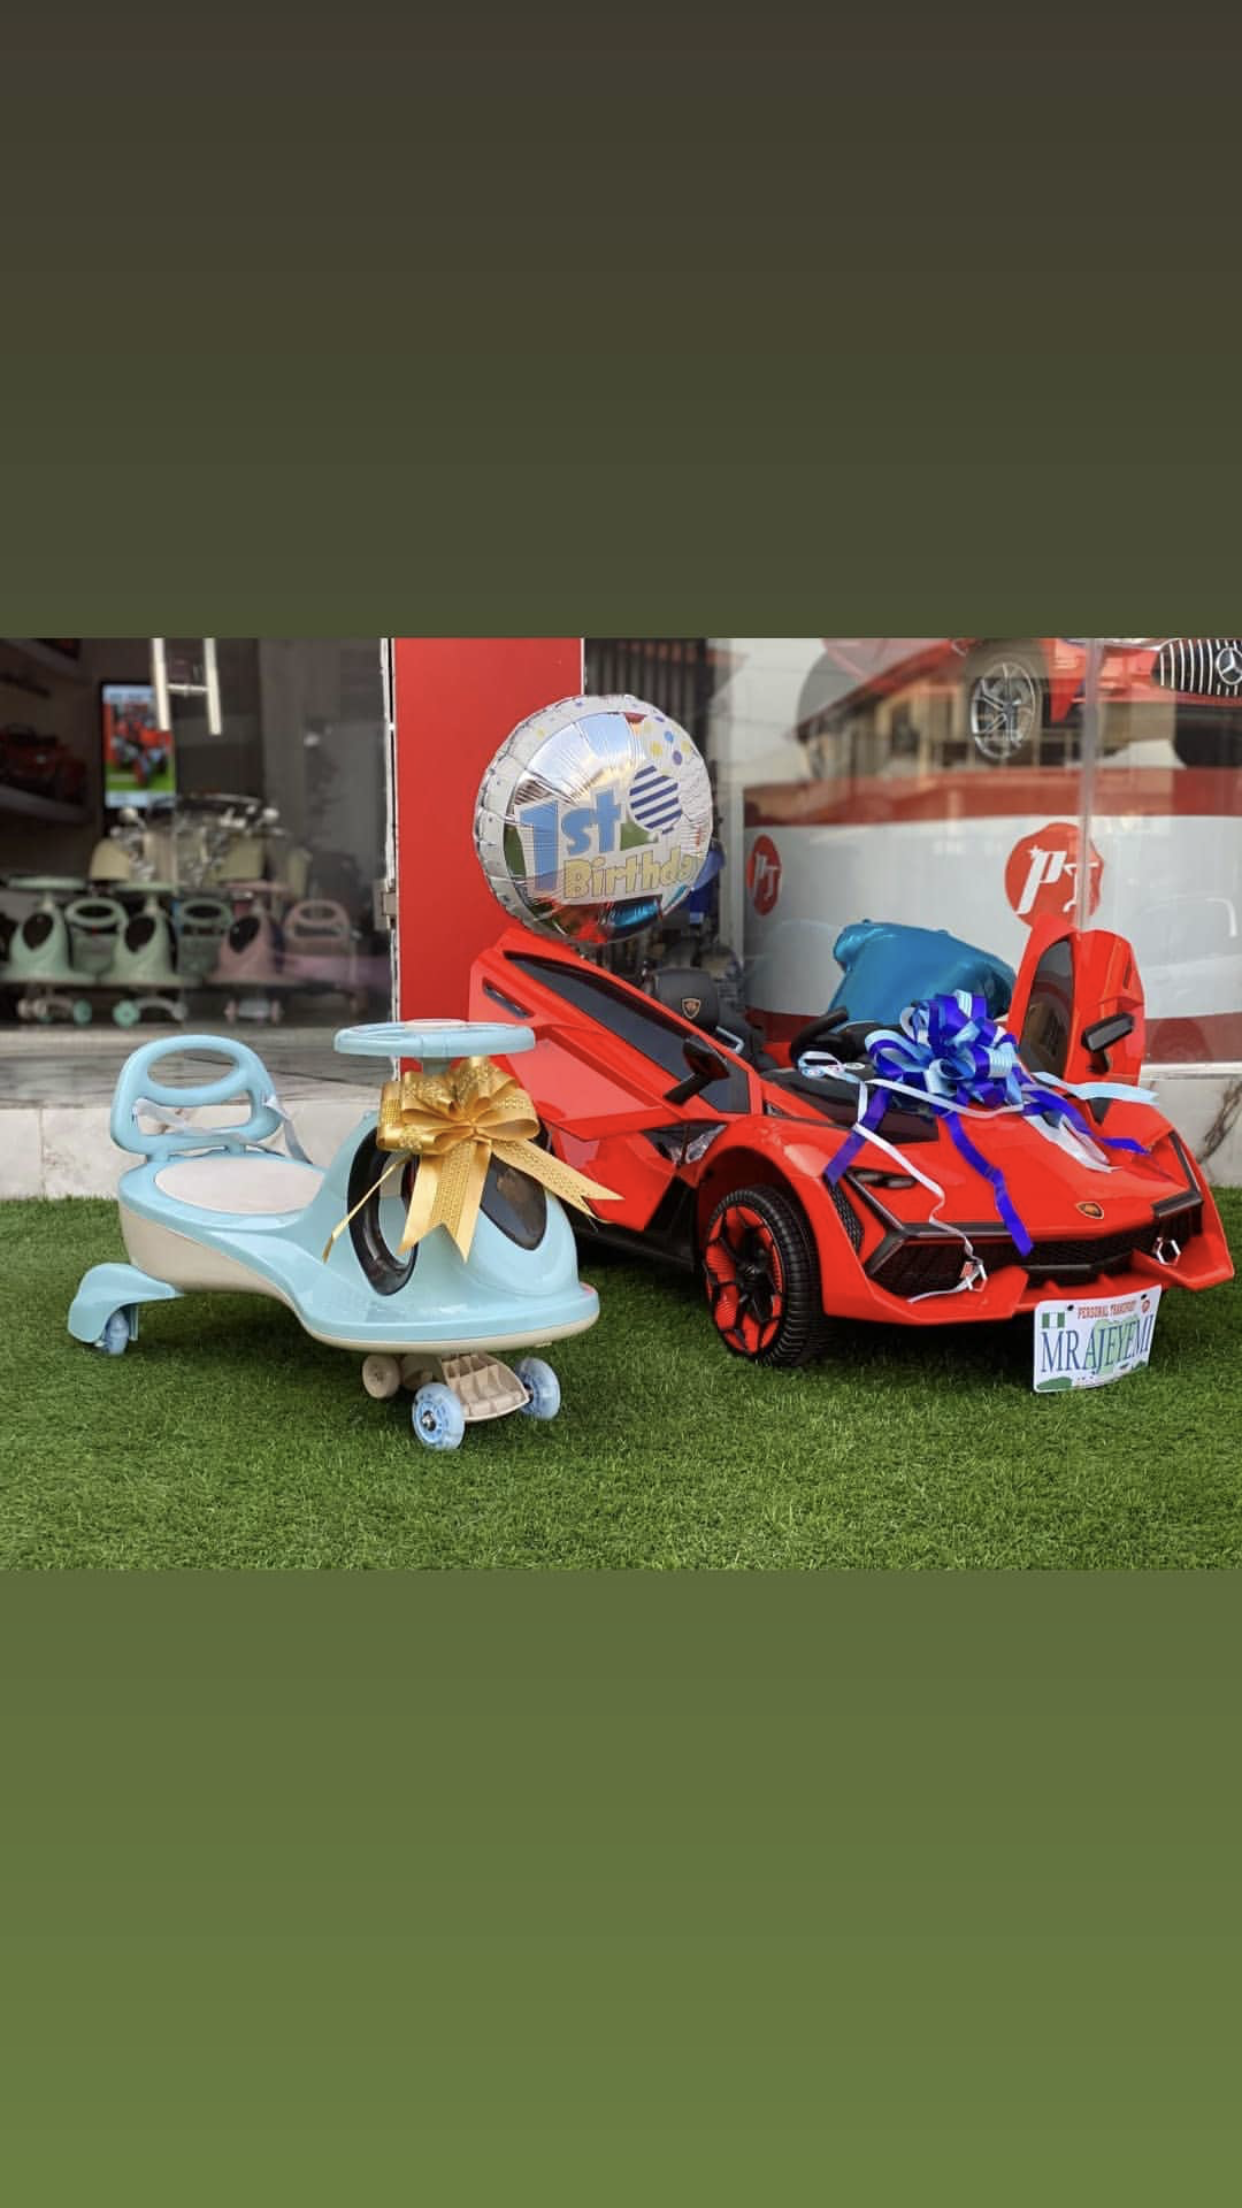 The toy cars